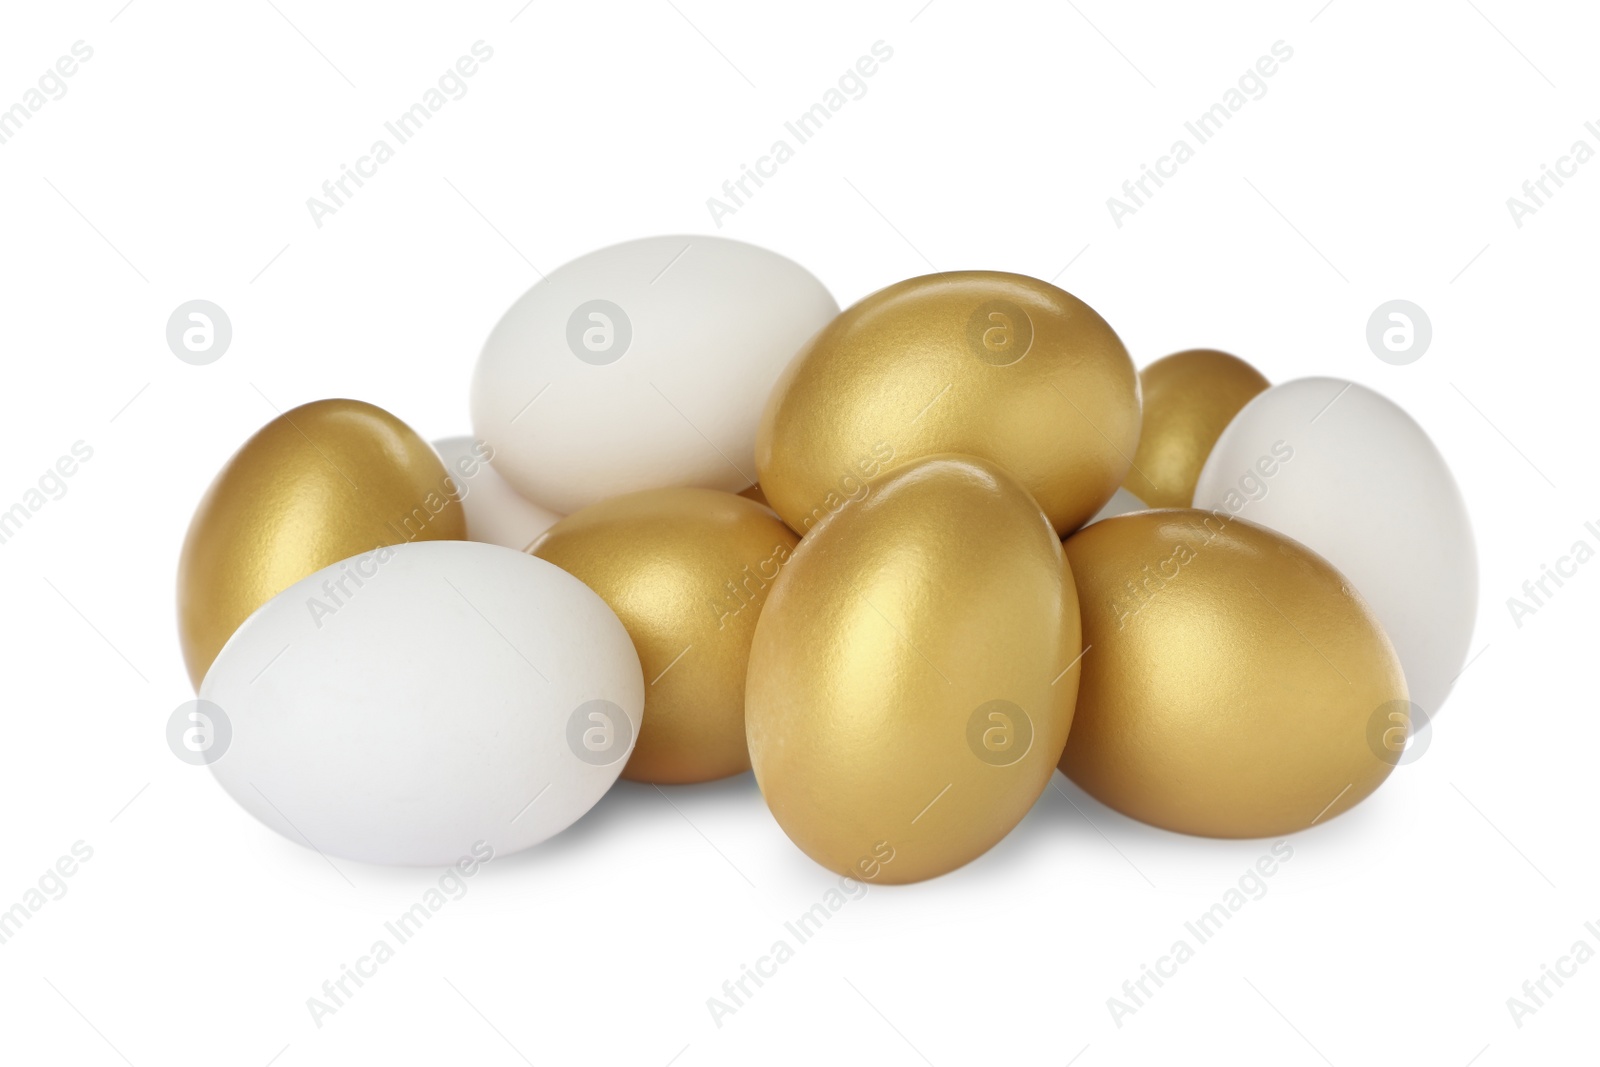 Photo of Golden eggs among ordinary ones on white background